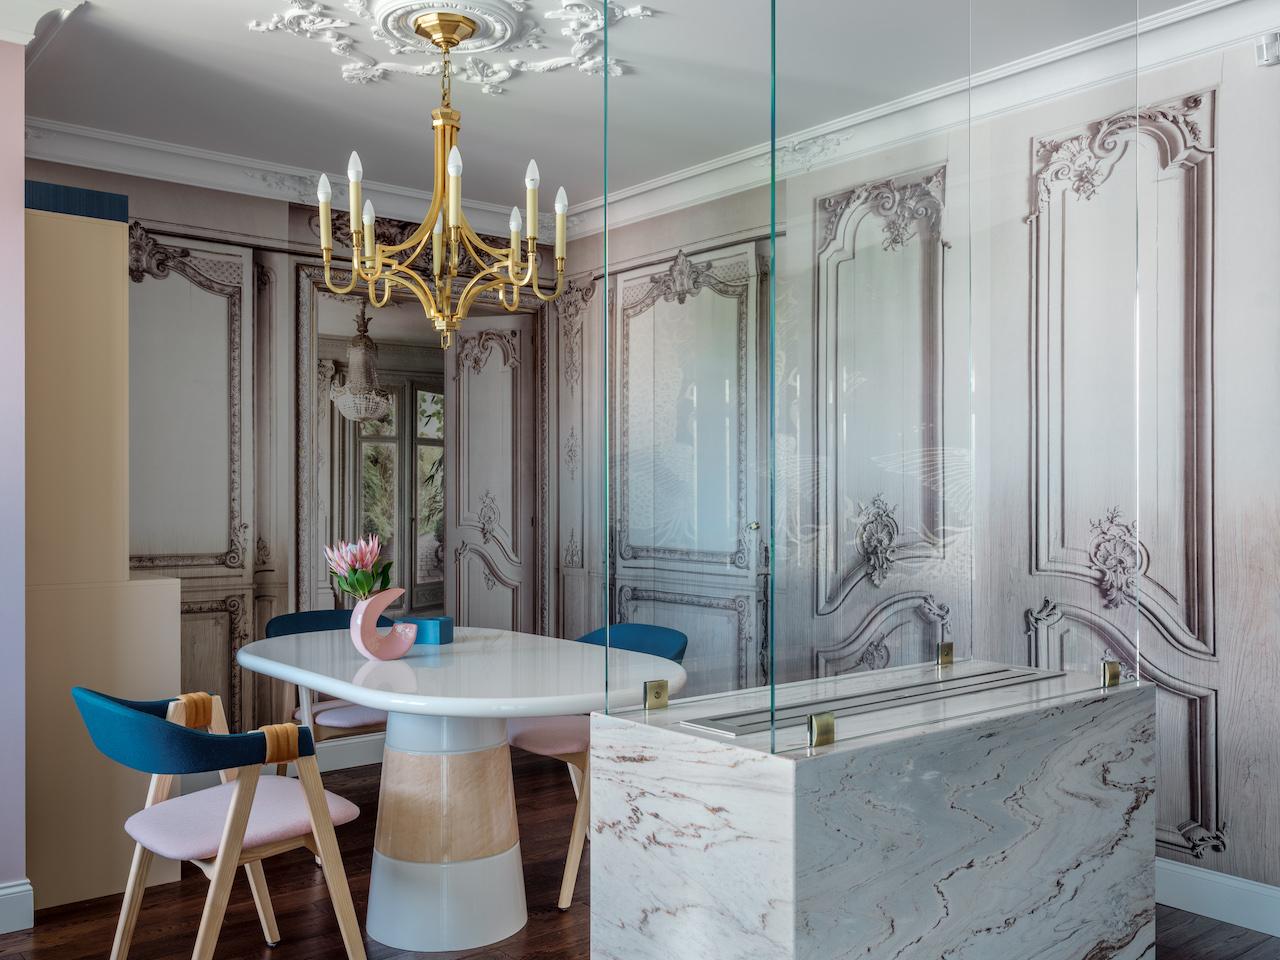 A Multifarious Home in Russia Brimming with Personality